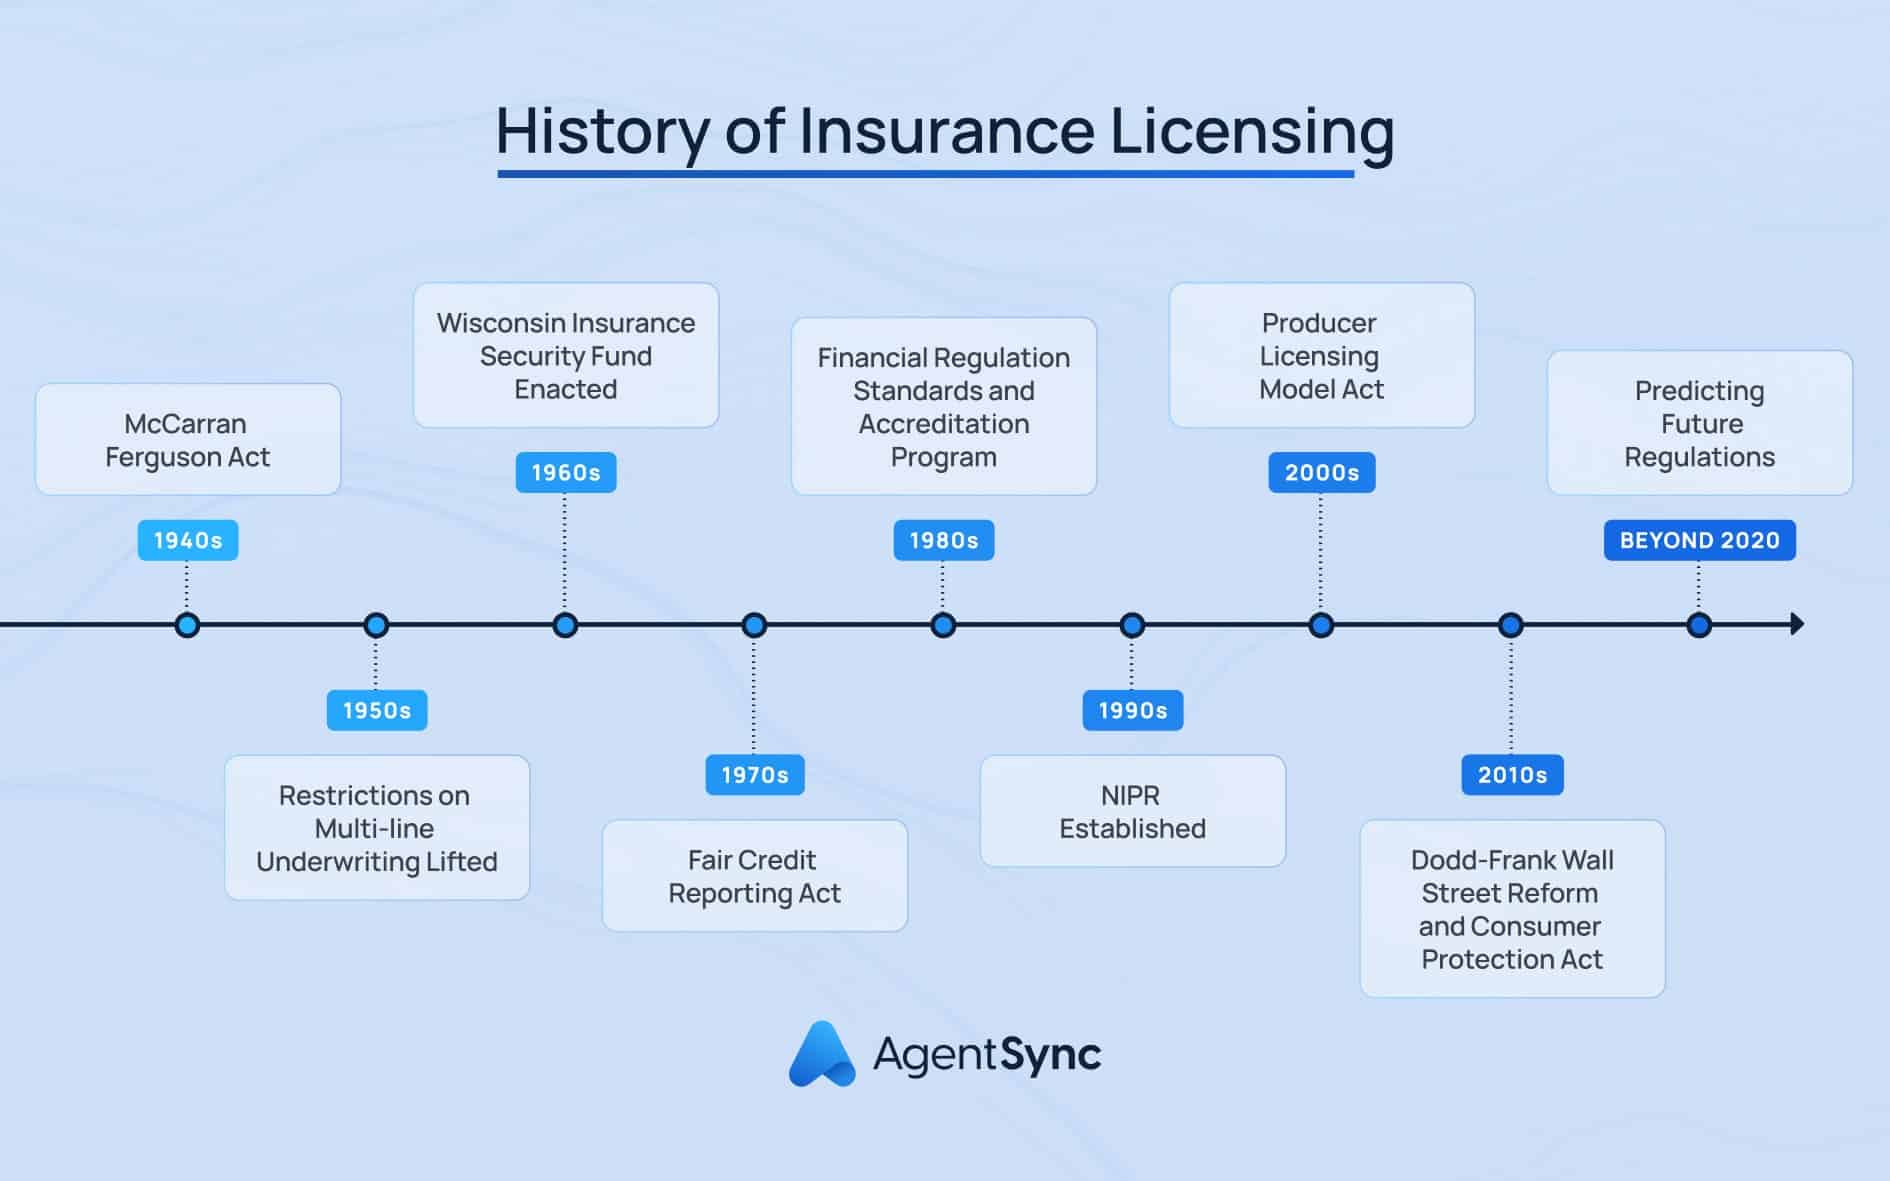 An Image showing the history of Insurance licensing regulation from 1940 to 2020 and beyond